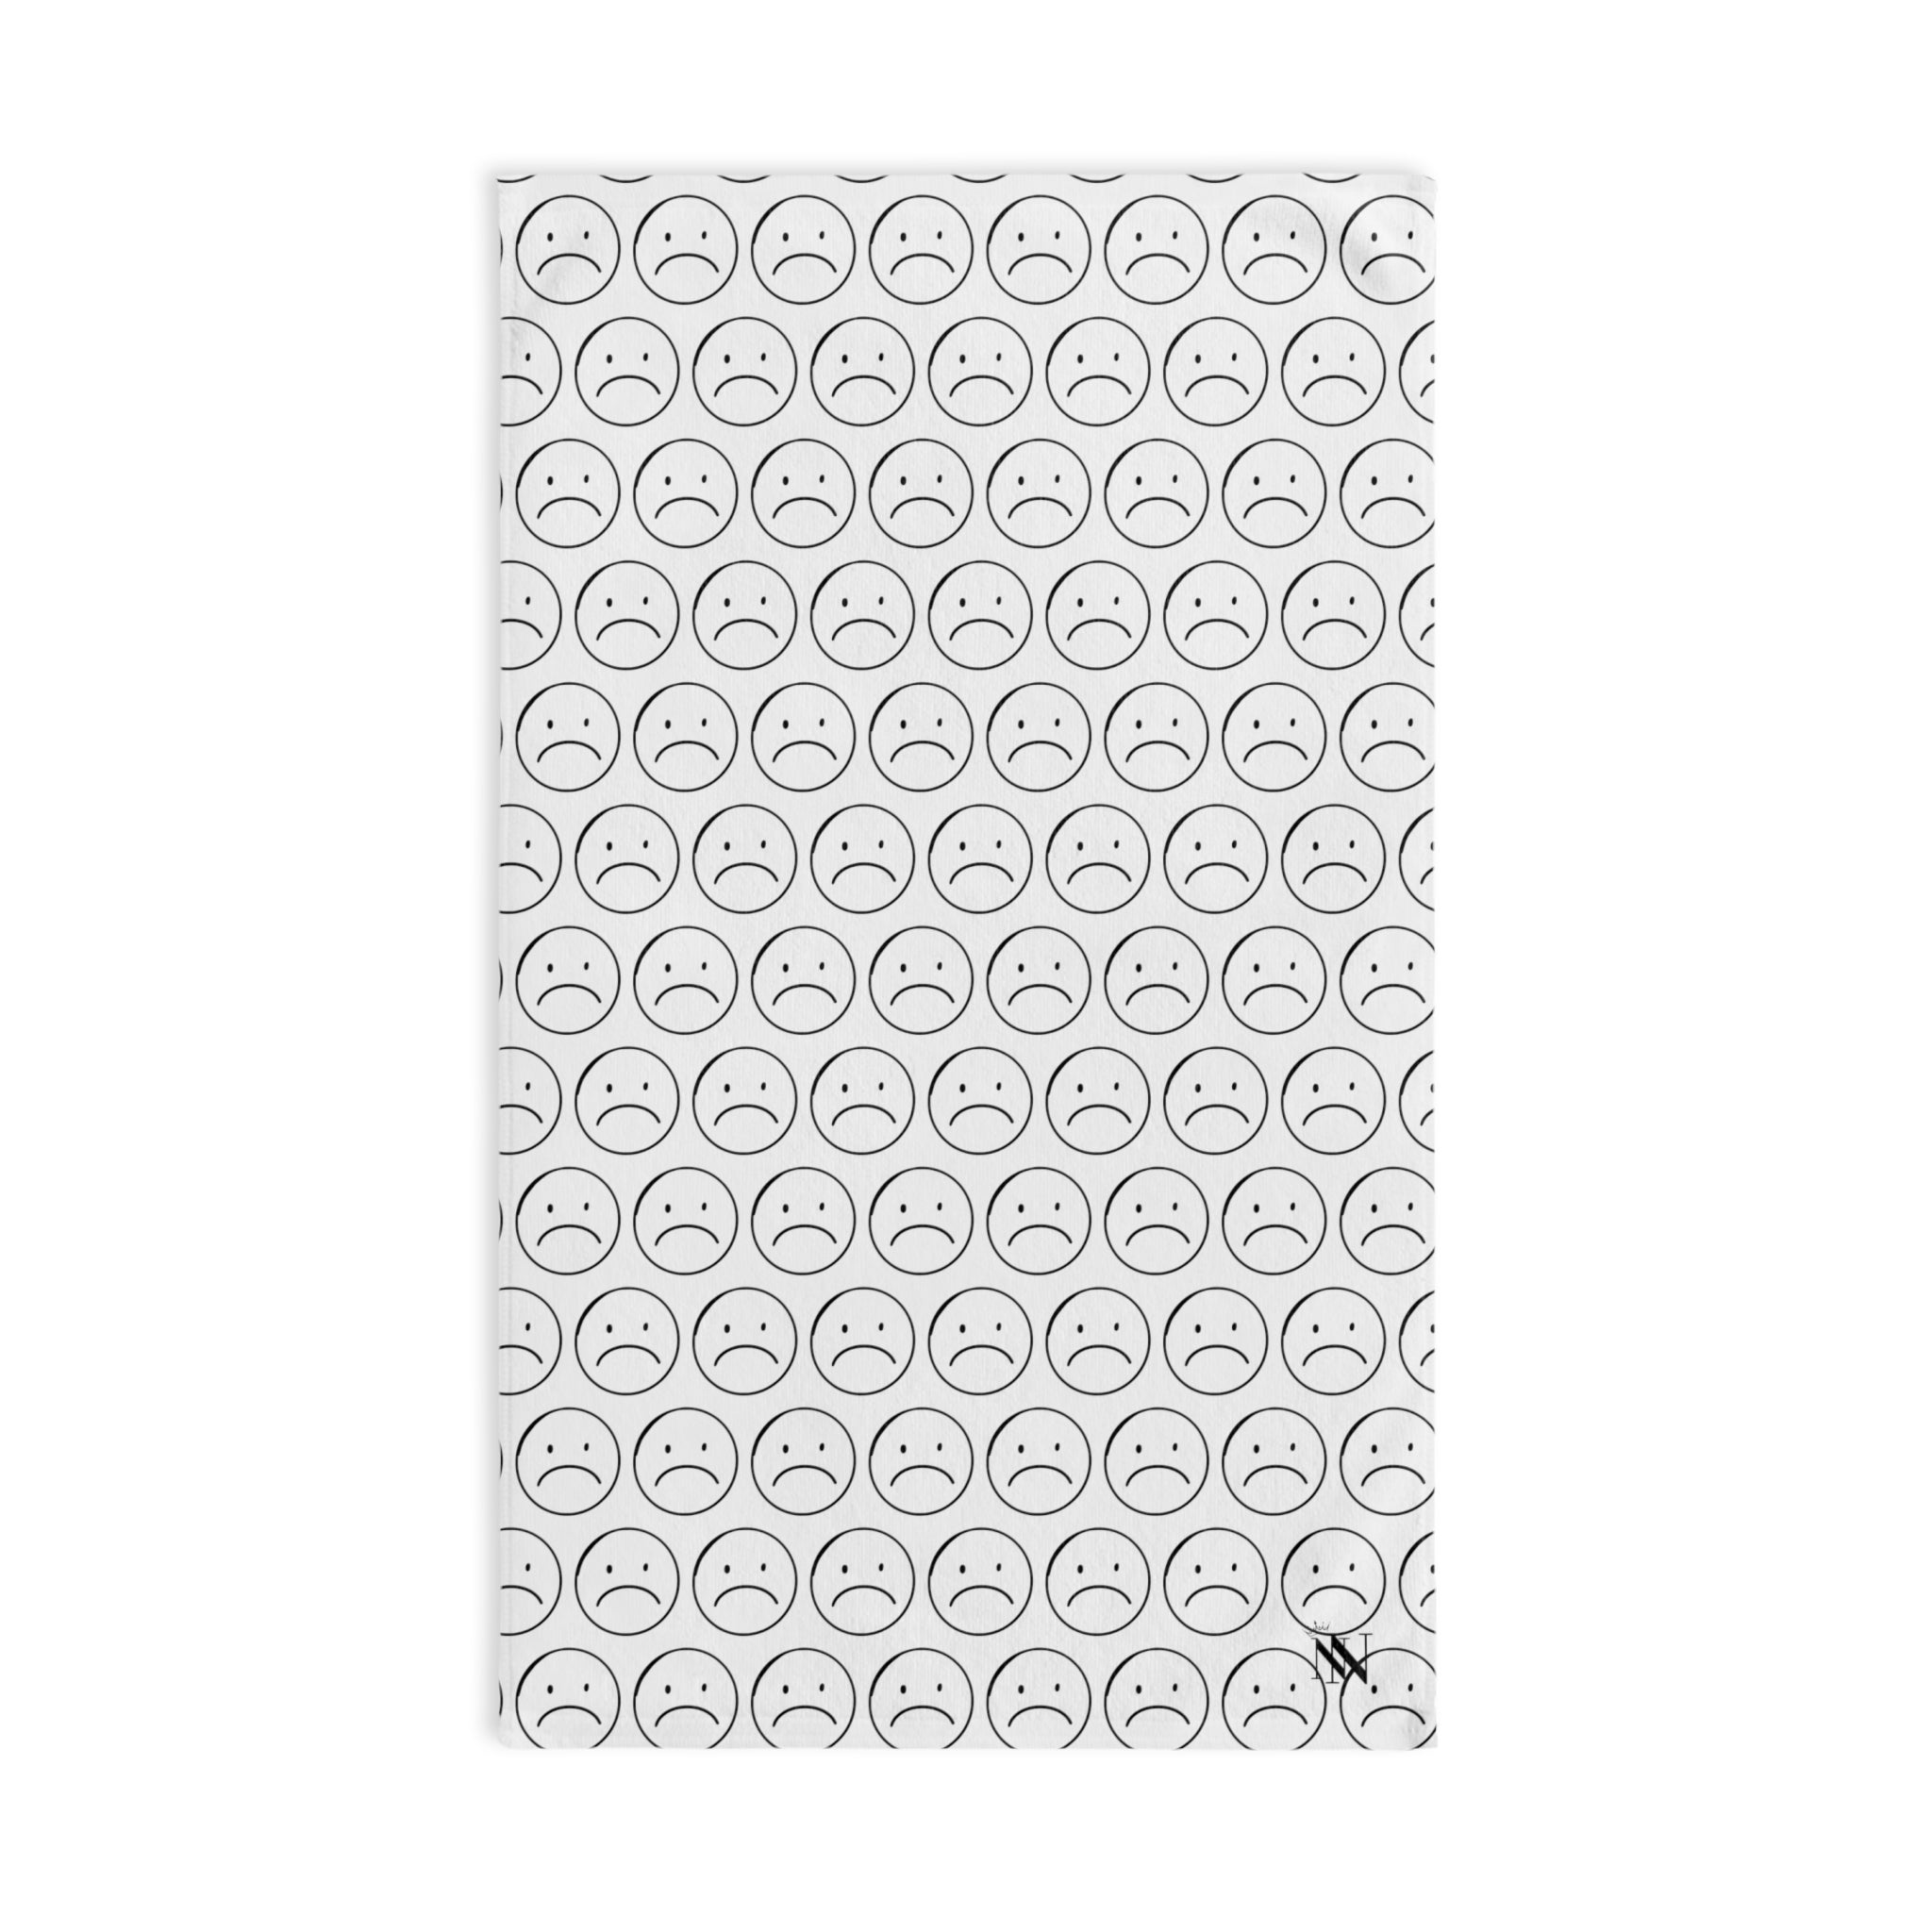 Sad Frown PatternWhite | Funny Gifts for Men - Gifts for Him - Birthday Gifts for Men, Him, Her, Husband, Boyfriend, Girlfriend, New Couple Gifts, Fathers & Valentines Day Gifts, Christmas Gifts NECTAR NAPKINS